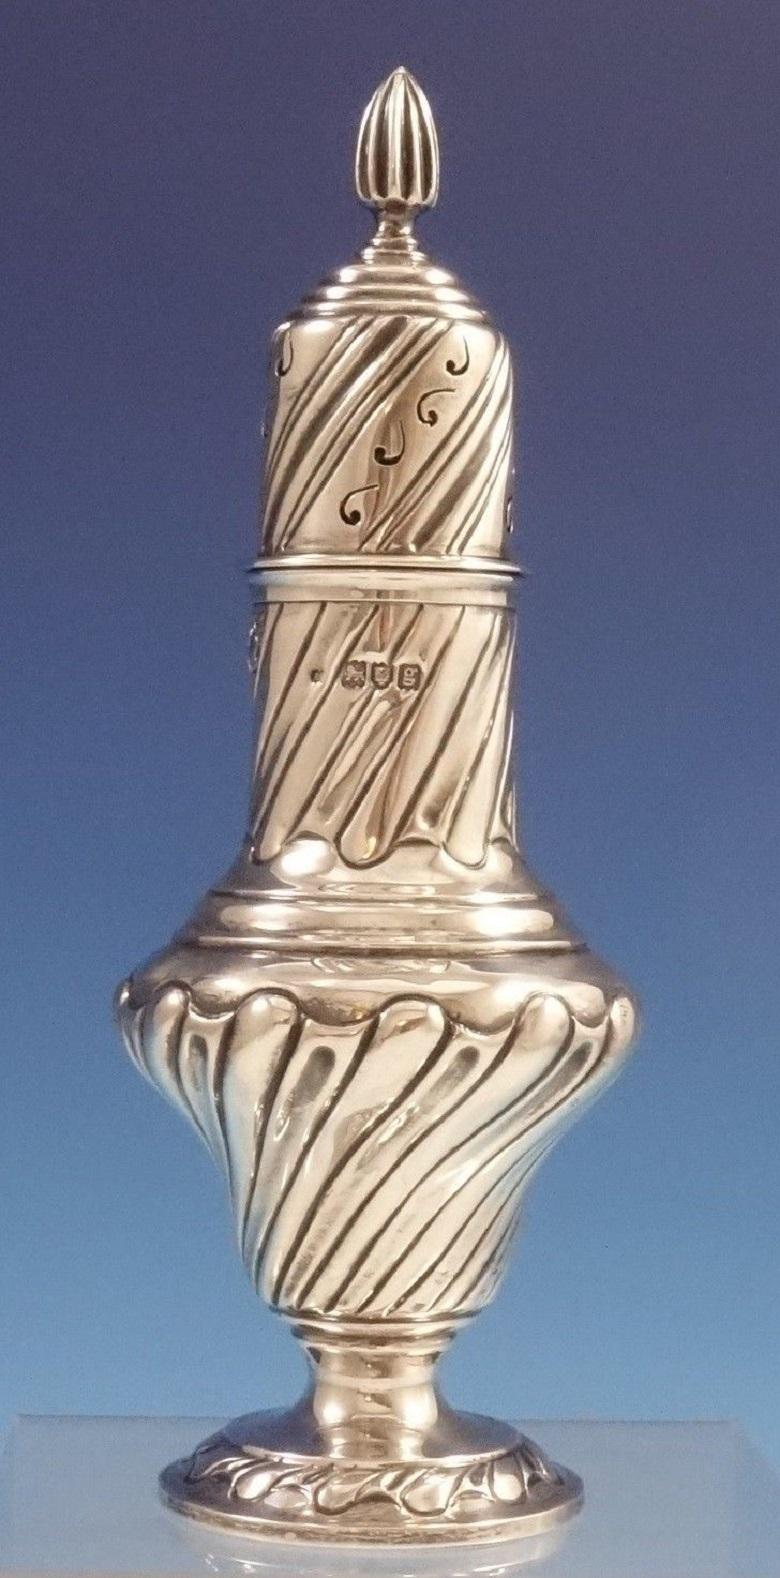 Lovely English sterling silver sugar shaker made in London in 1902. This piece measures 9 tall x 2 1/2 and weighs 7.8 troy ounces. It is not monogrammed and is in excellent condition. Fabulous!